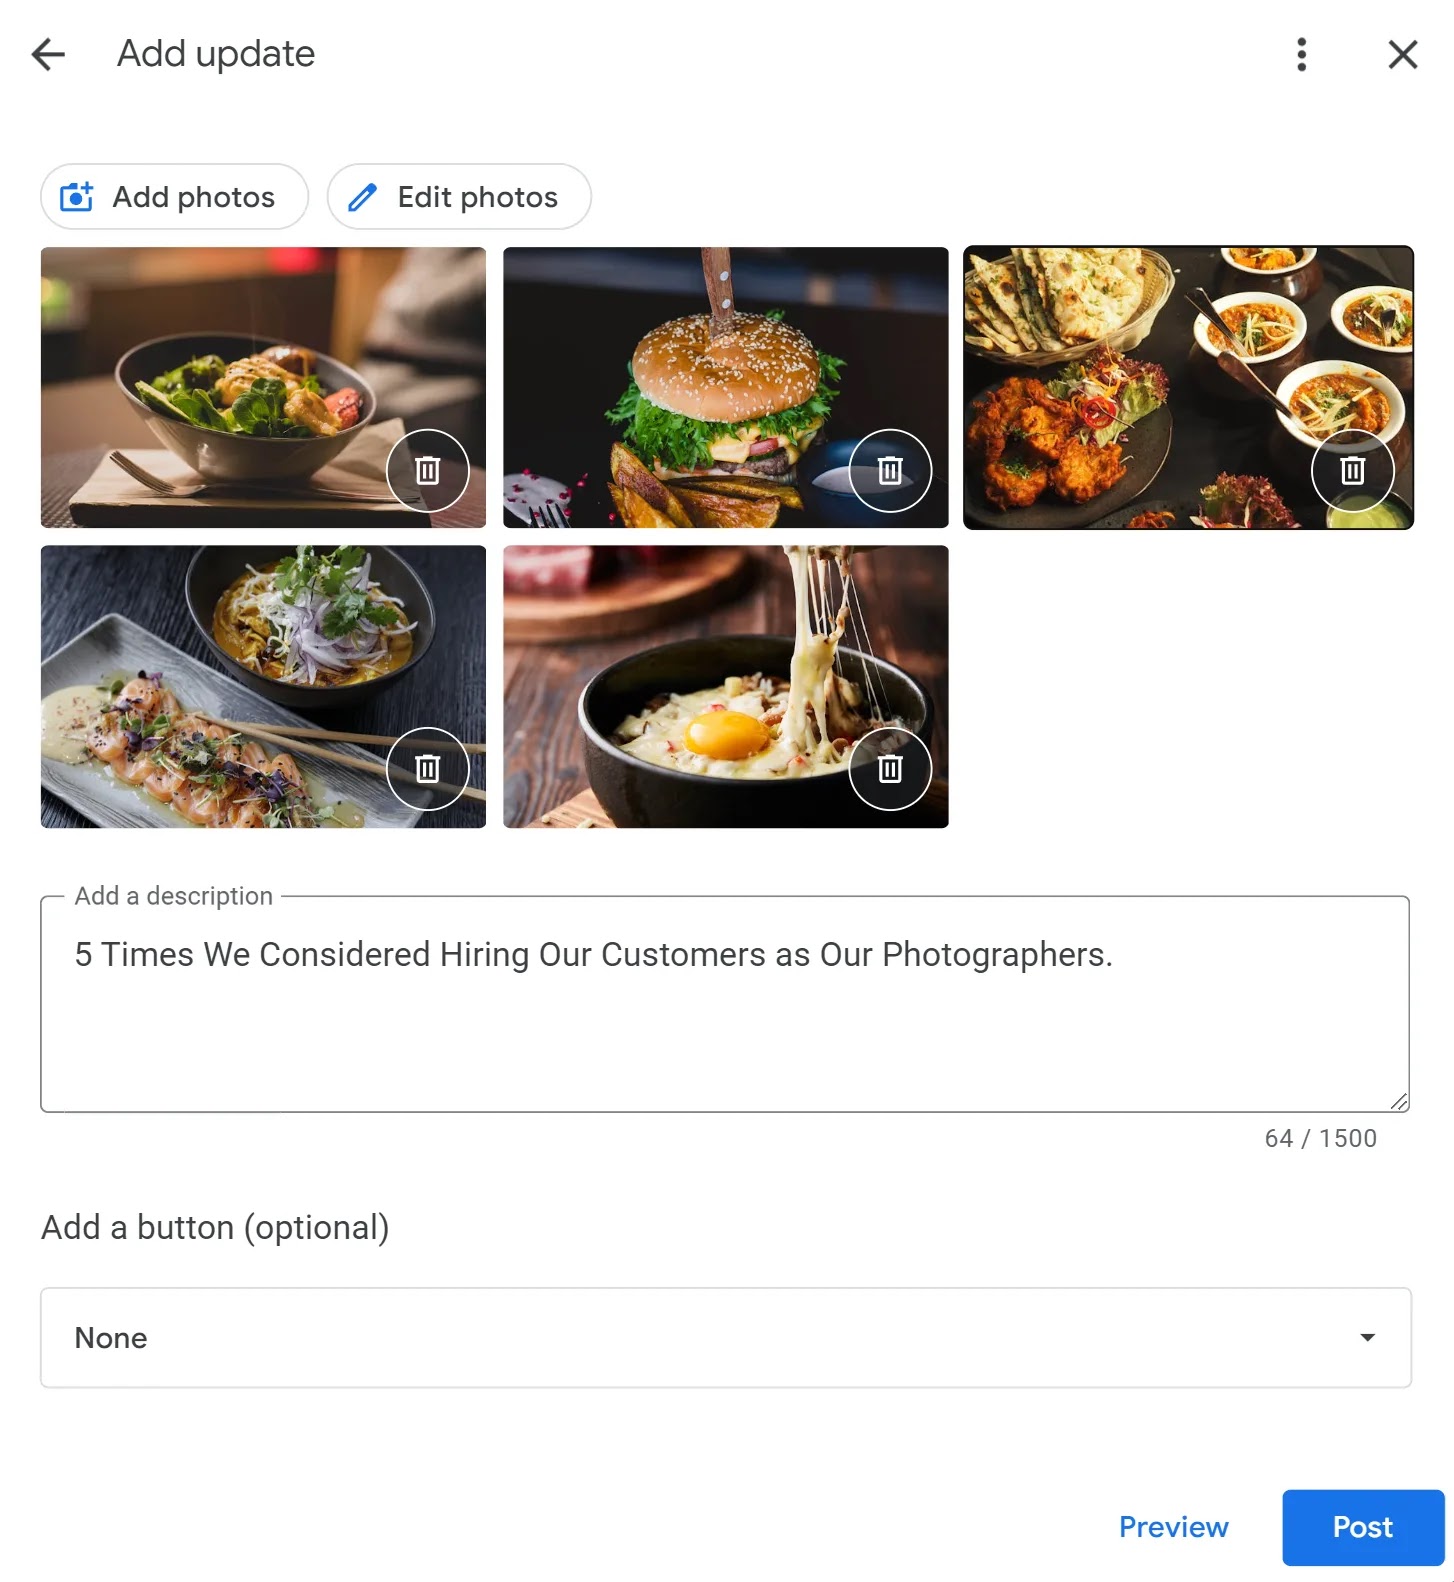 Creating a GBP update with UGC and a description that reads “5 Times We Considered Hiring Our Customers as Our Photographers"